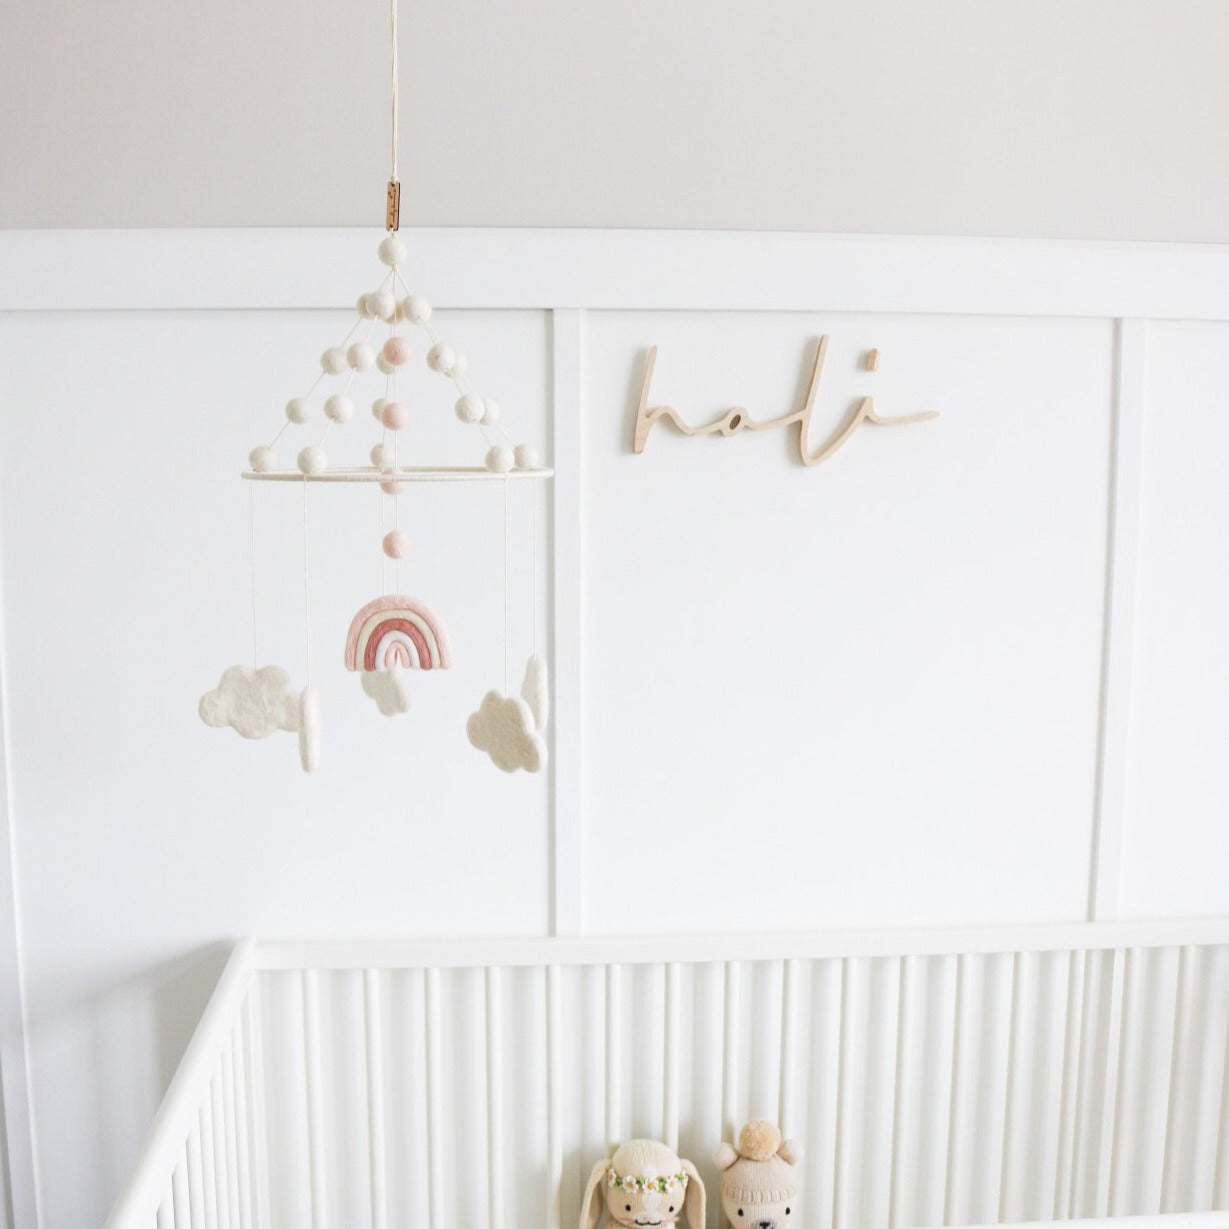 White crib with wooden 'Nursery Name Sign' above it in baby's nursery